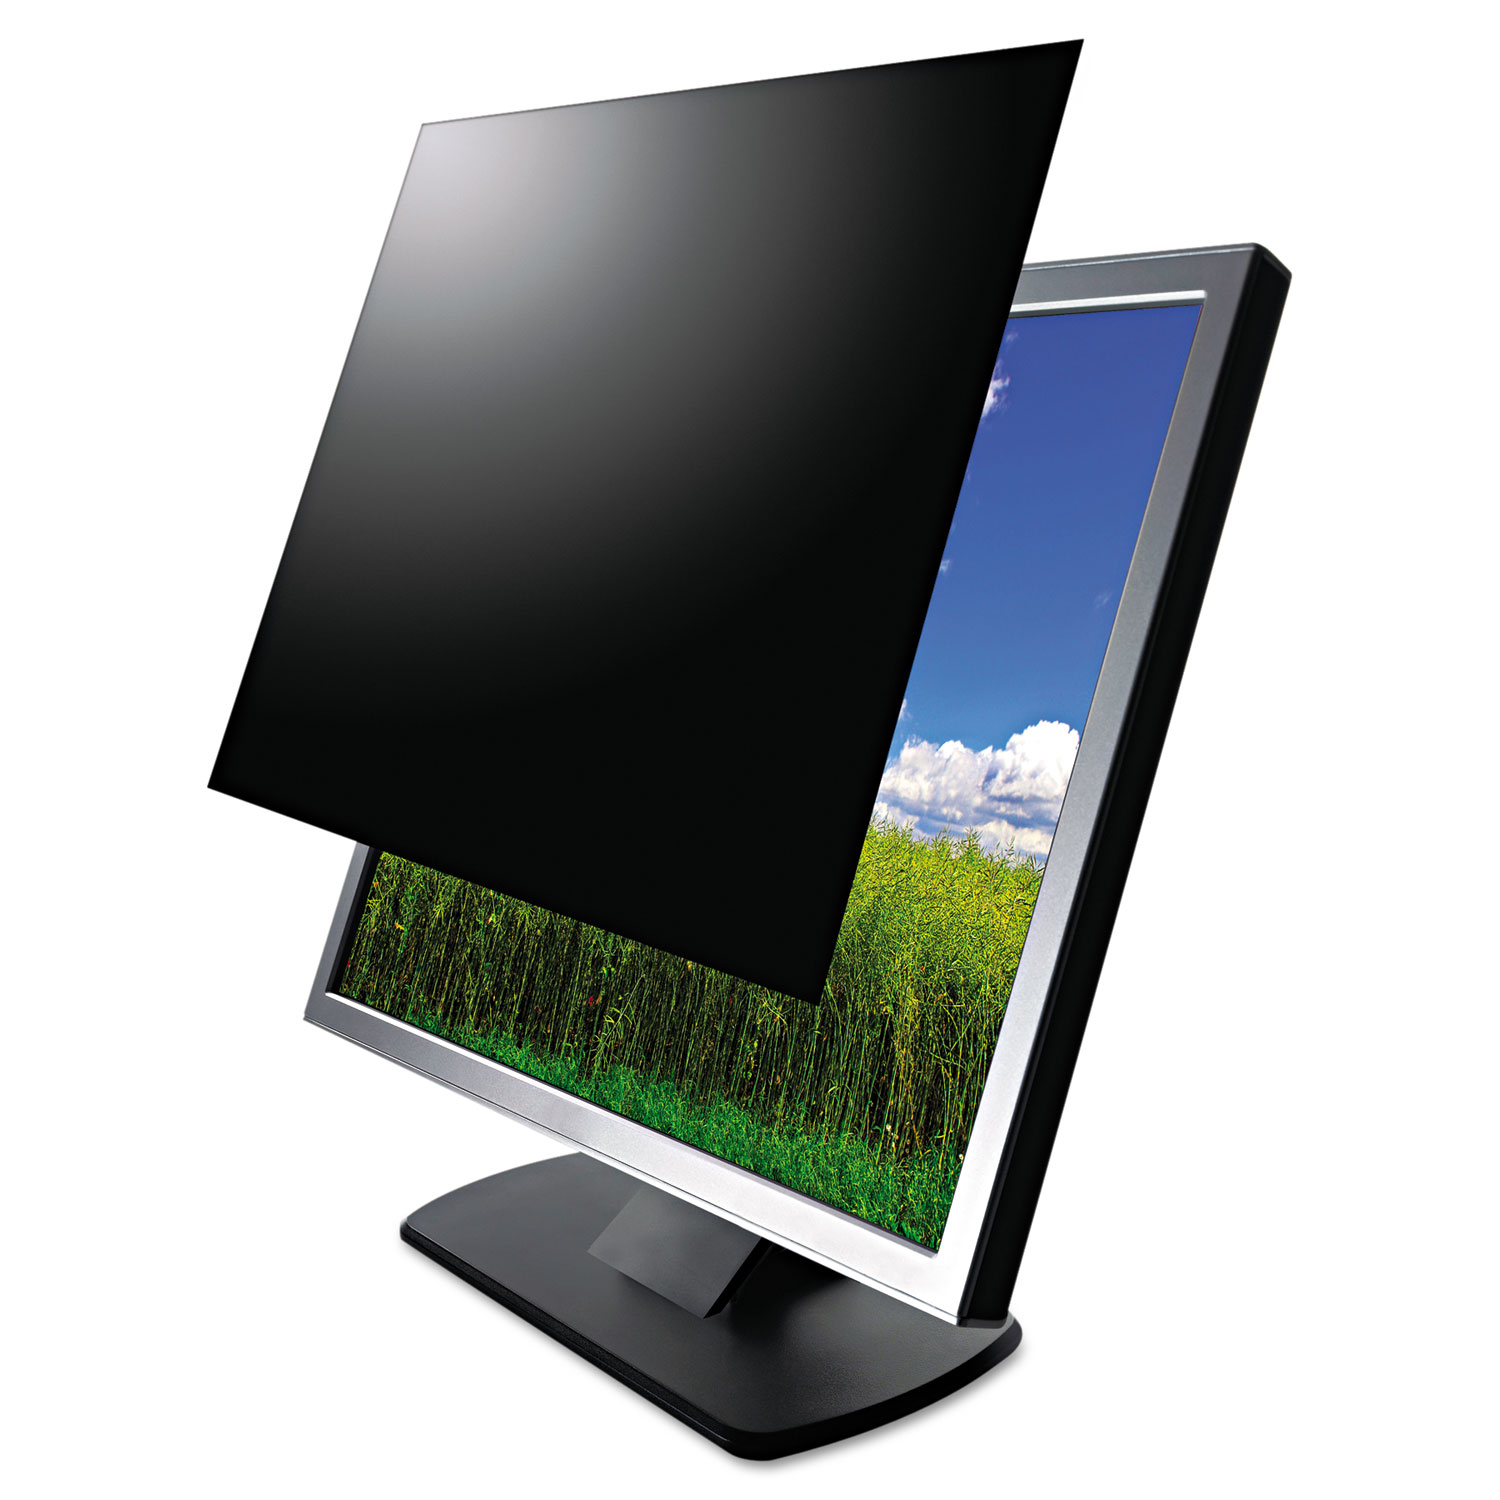 Secure View LCD Monitor Privacy Filter For 21.5 Widescreen